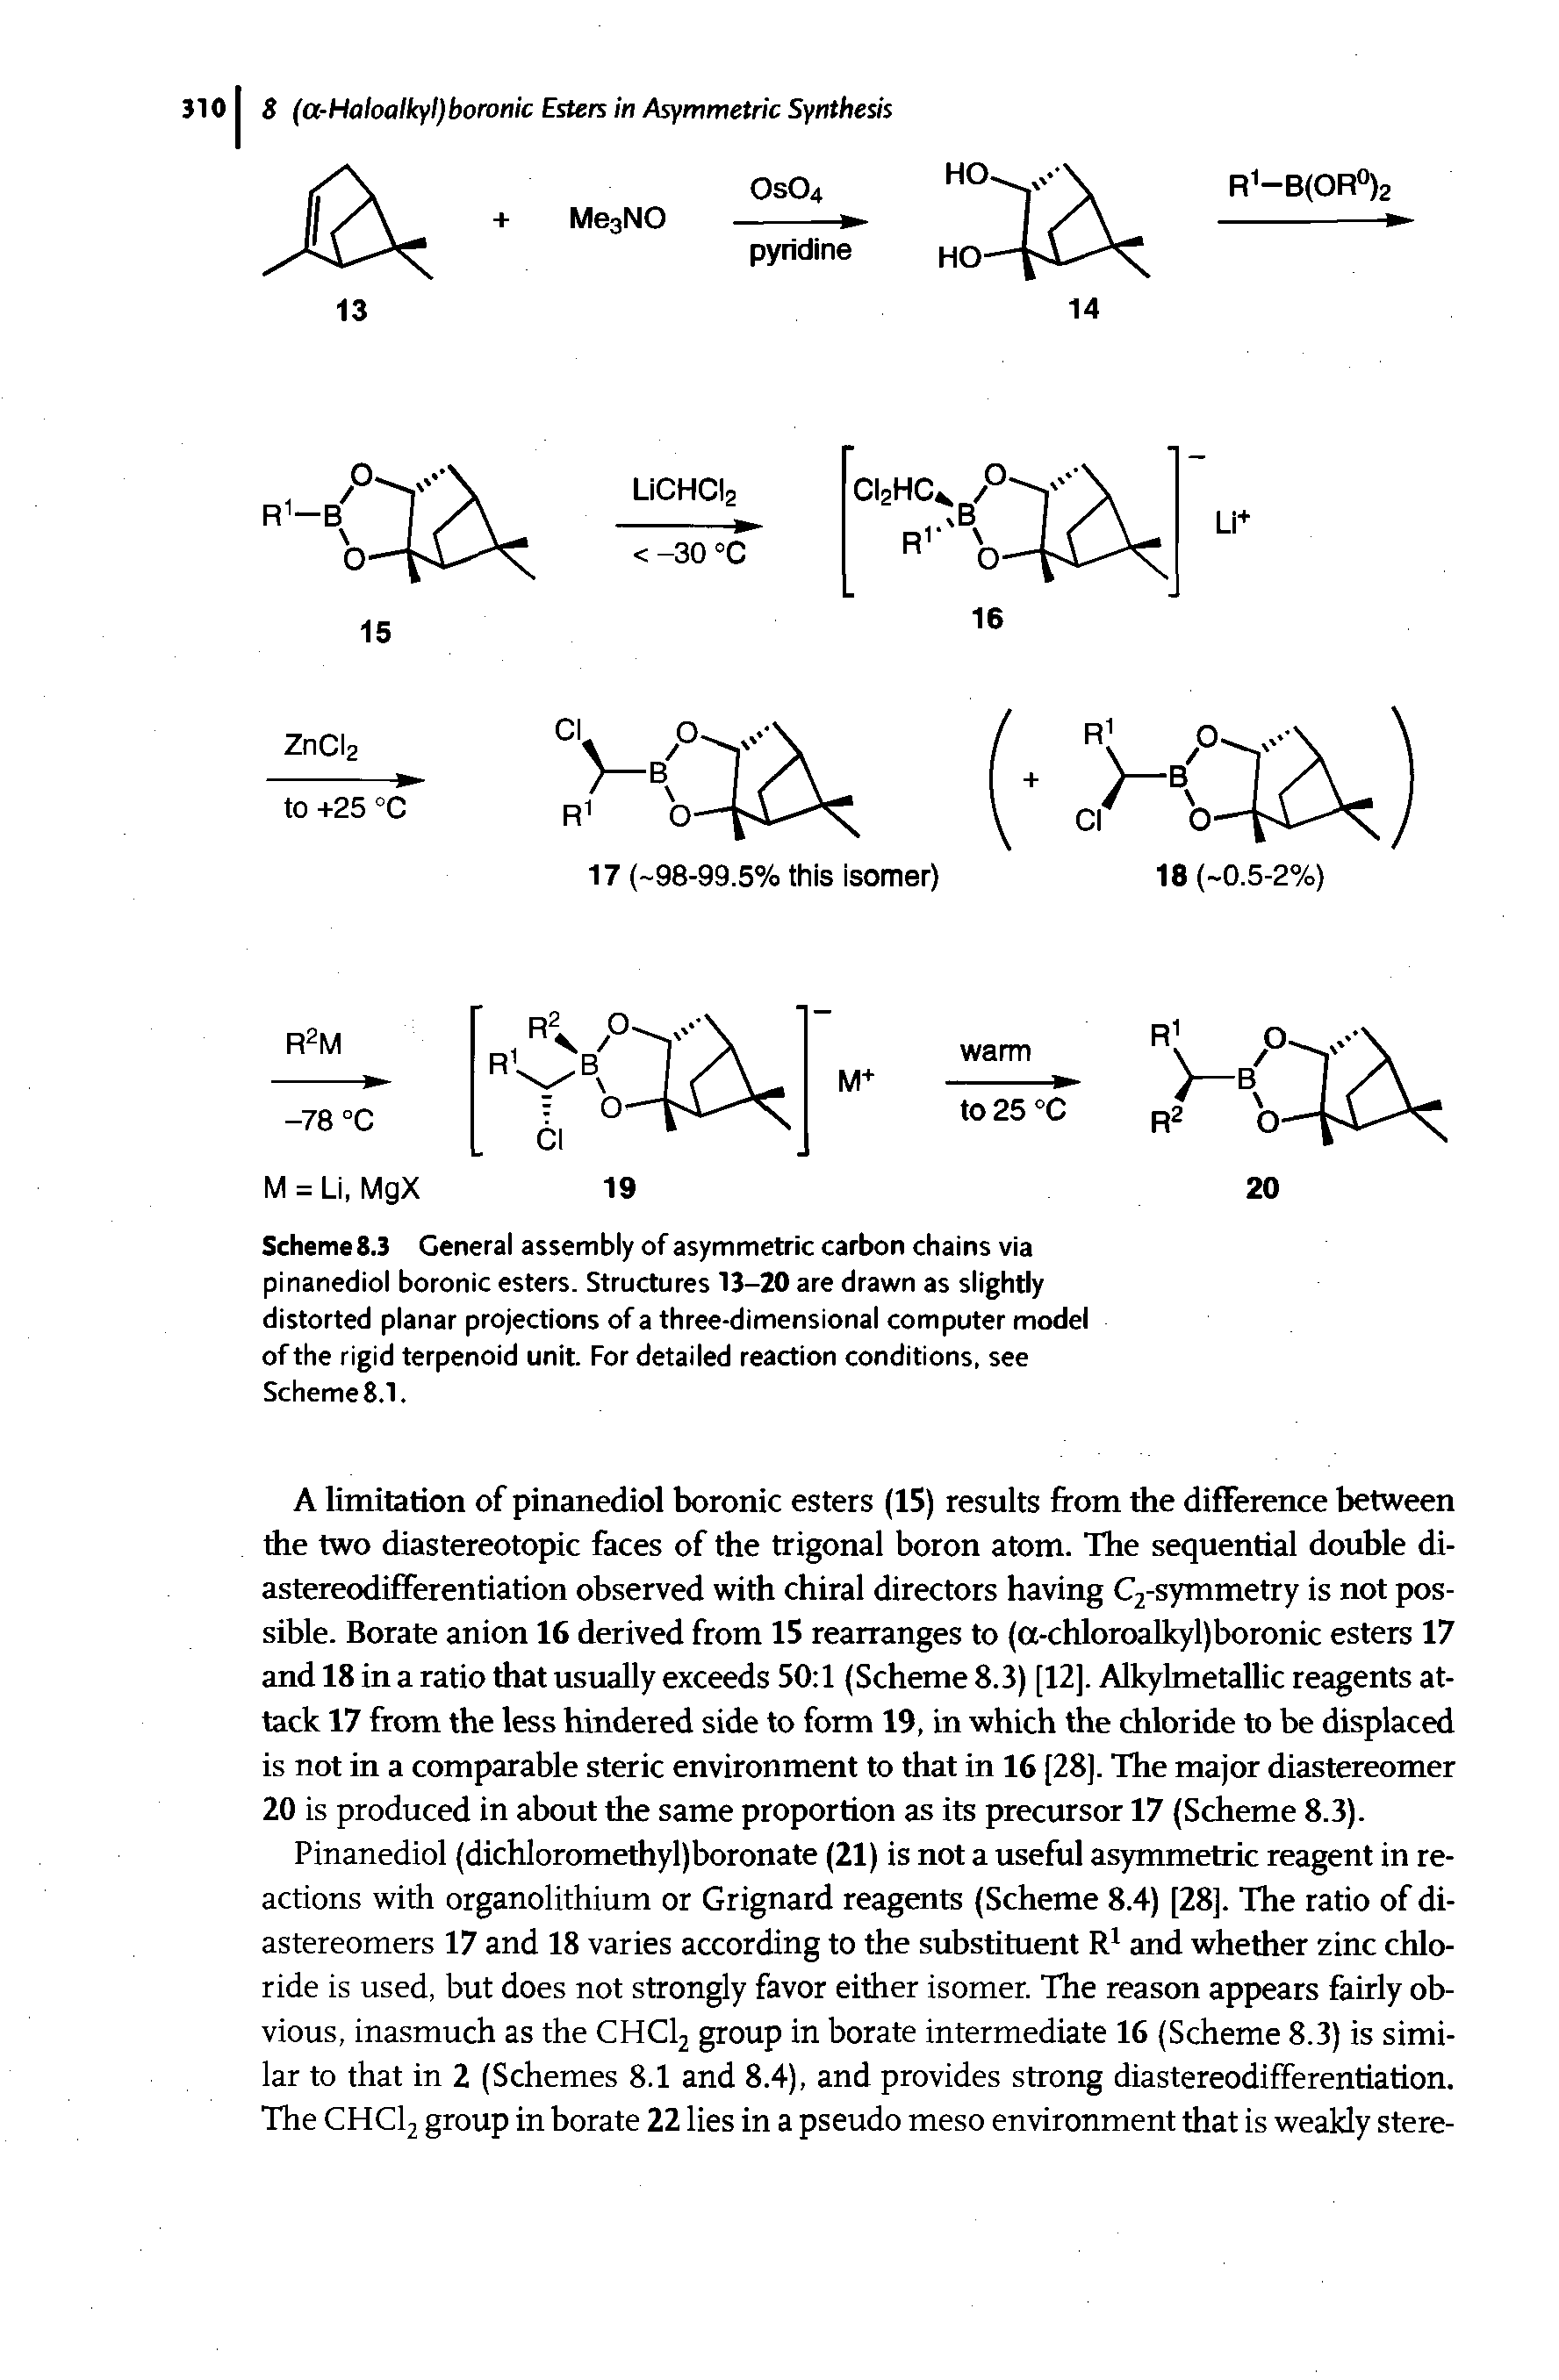 Scheme 8.3 General assembly of asymmetric carbon chains via pinanediol boronic esters. Structures 13-20 are drawn as slightly distorted planar projections of a three-dimensional computer model of the rigid terpenoid unit. For detailed reaction conditions, see Scheme 8.1.